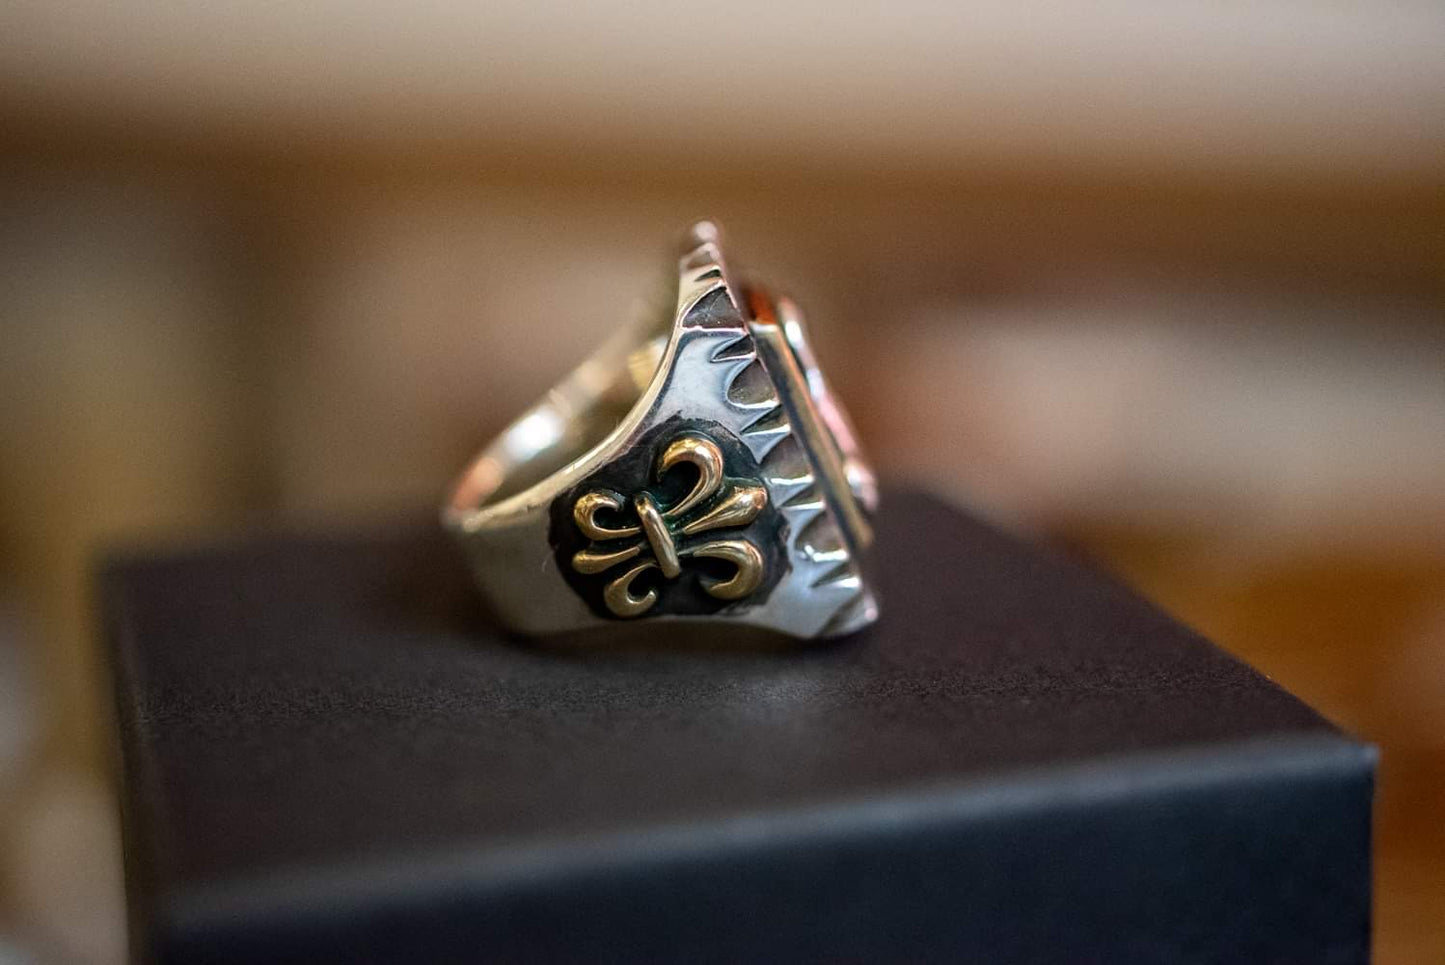 Handcrafted from sterling silver and brass in south korea these mexican biker rings are built to last, featuring a raised cobra motif.